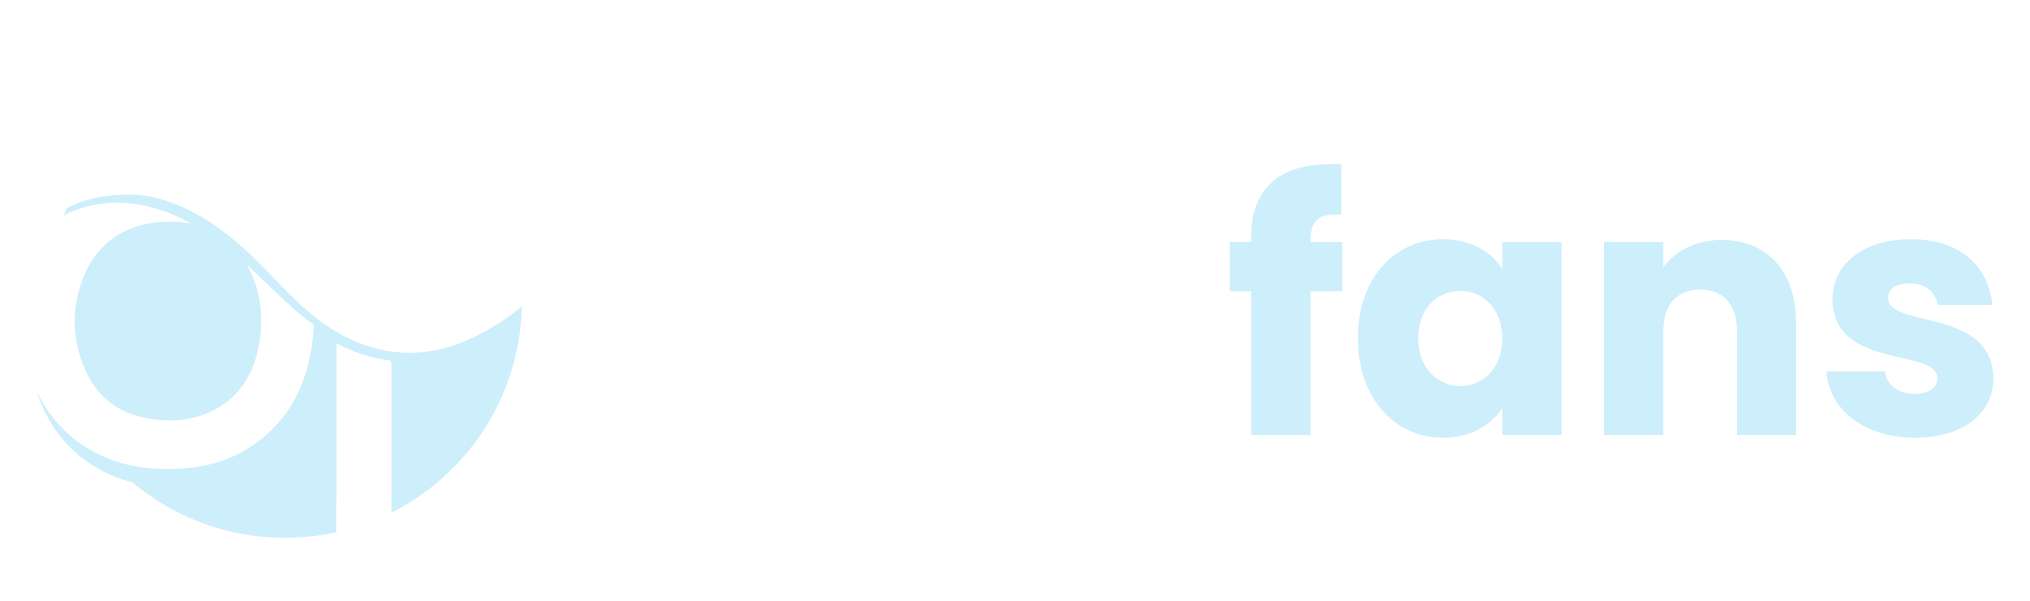 Subscription-Based Social Platform for UK Fans and Creators | Social Interaction, Content Creation and More | Oozfans